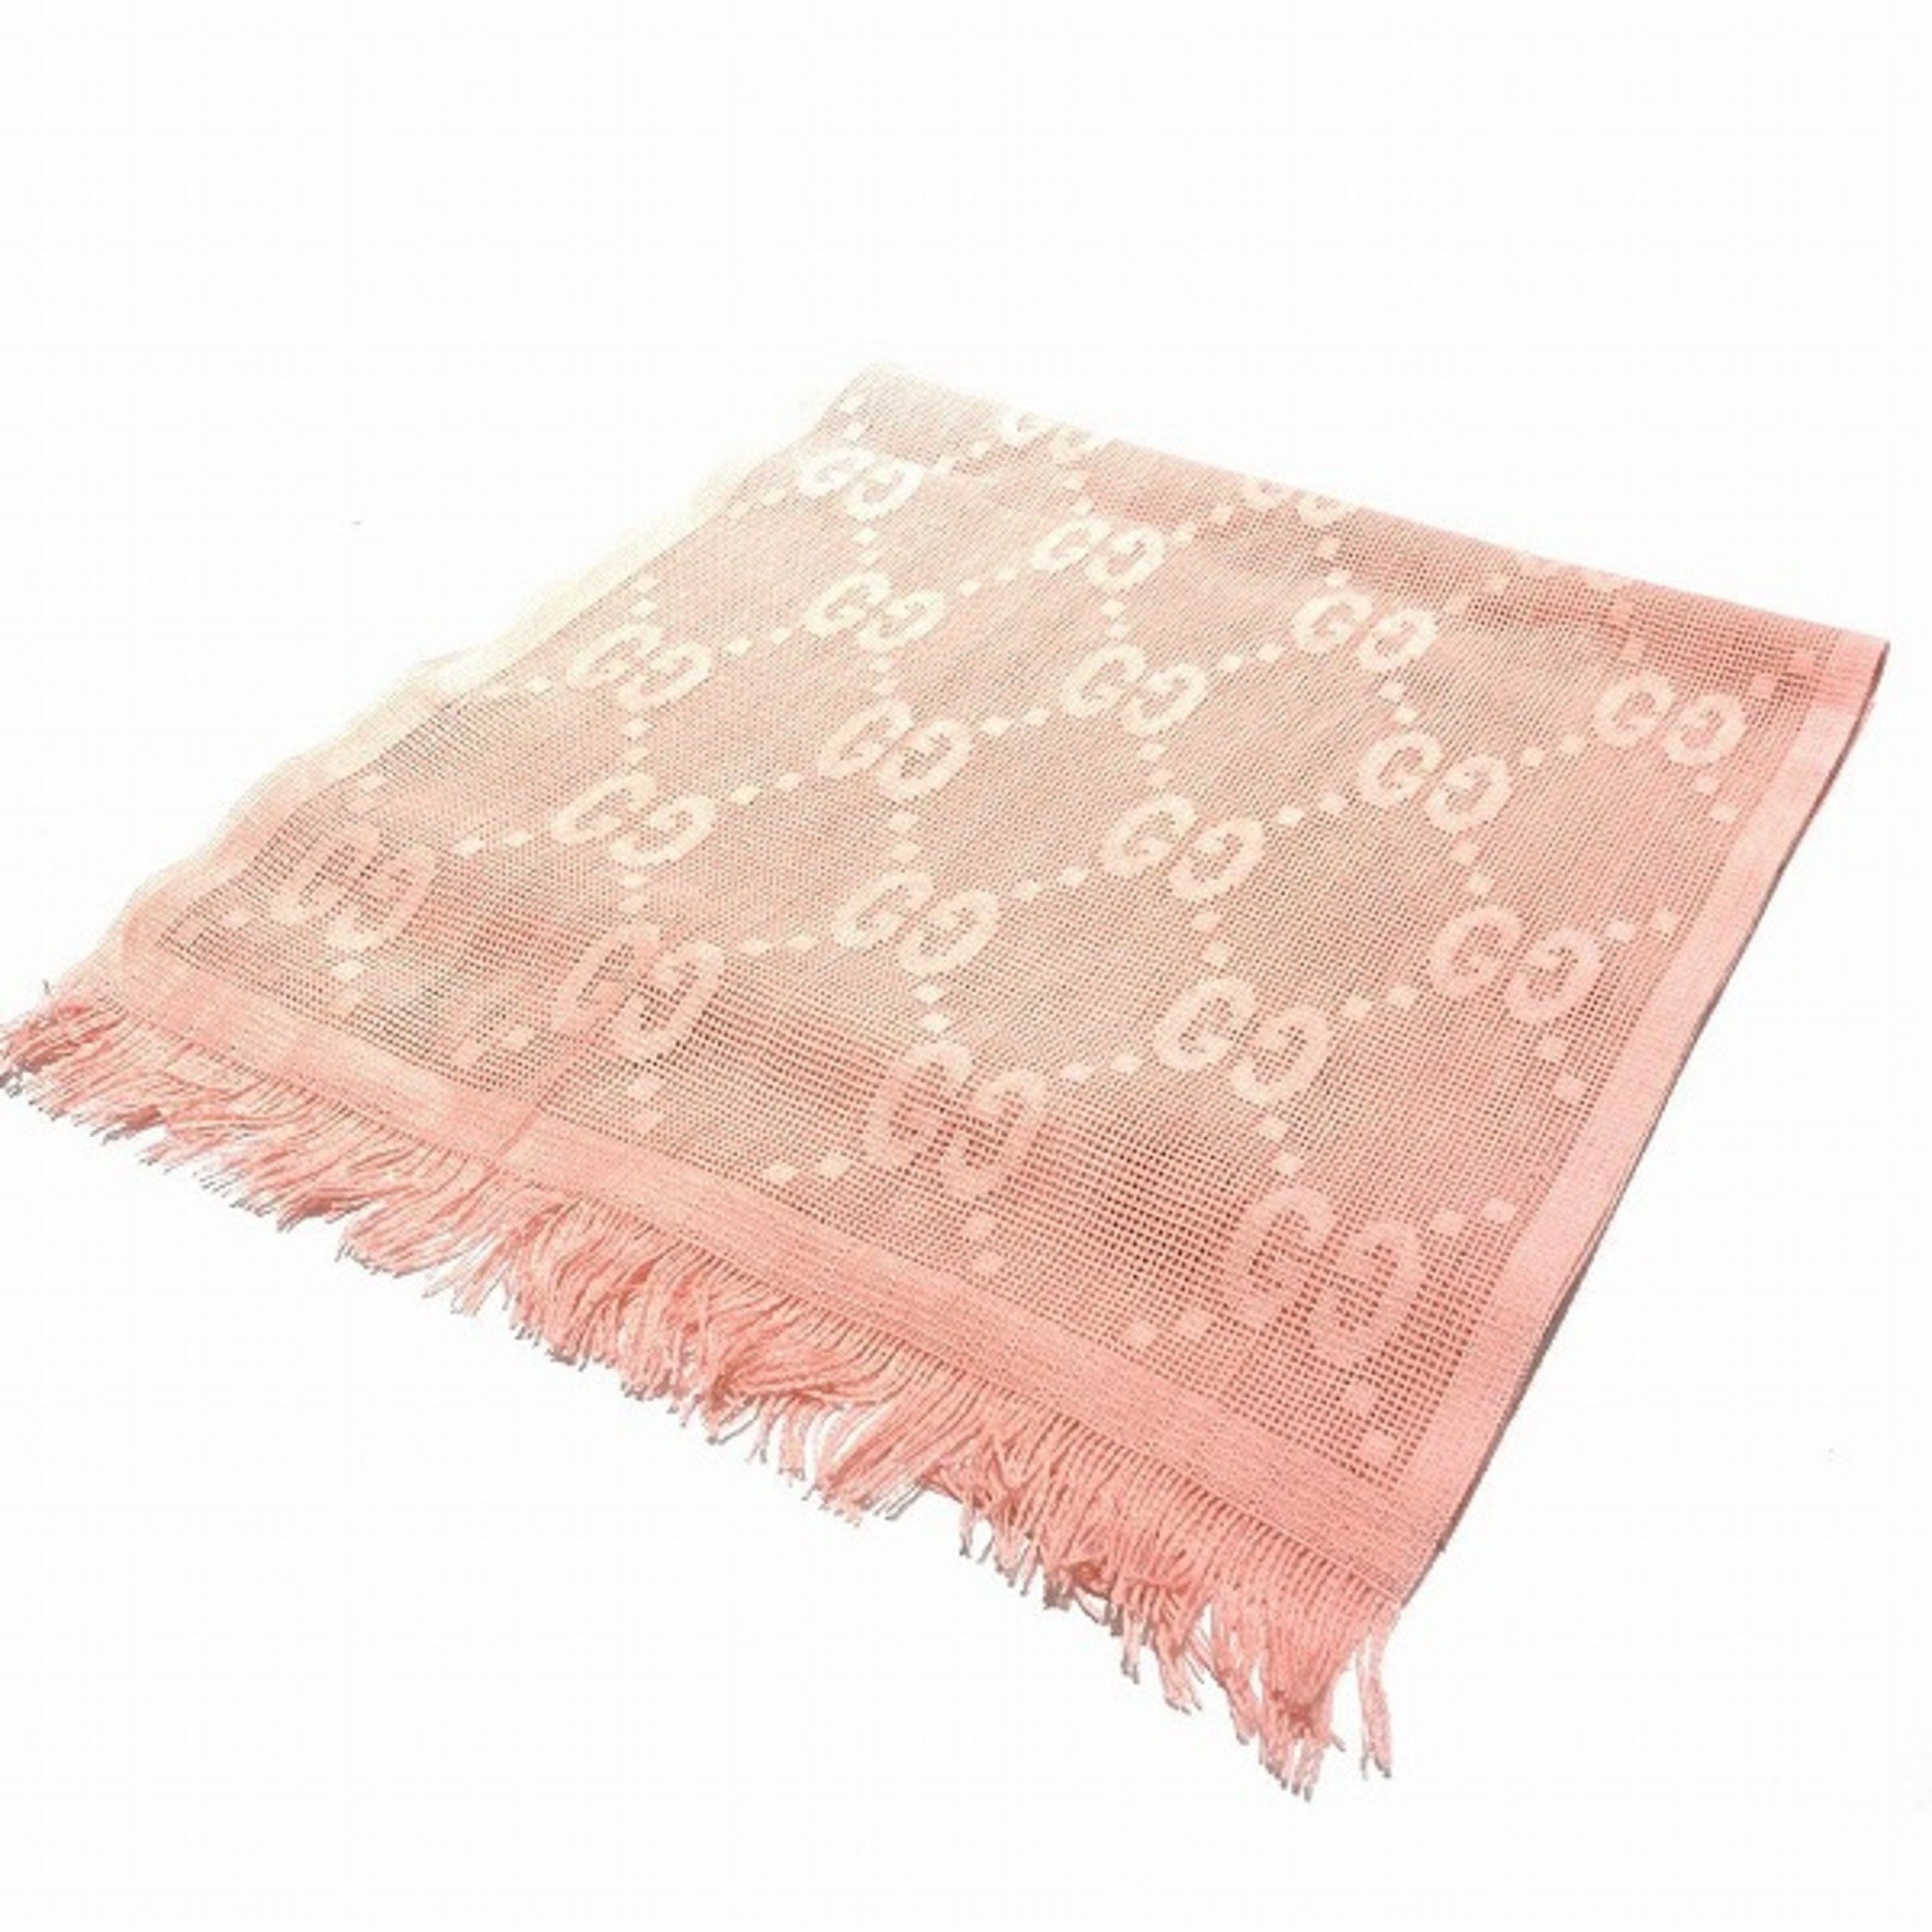 GUCCI 640680 3GG01 5800 Accessories Scarves for Women